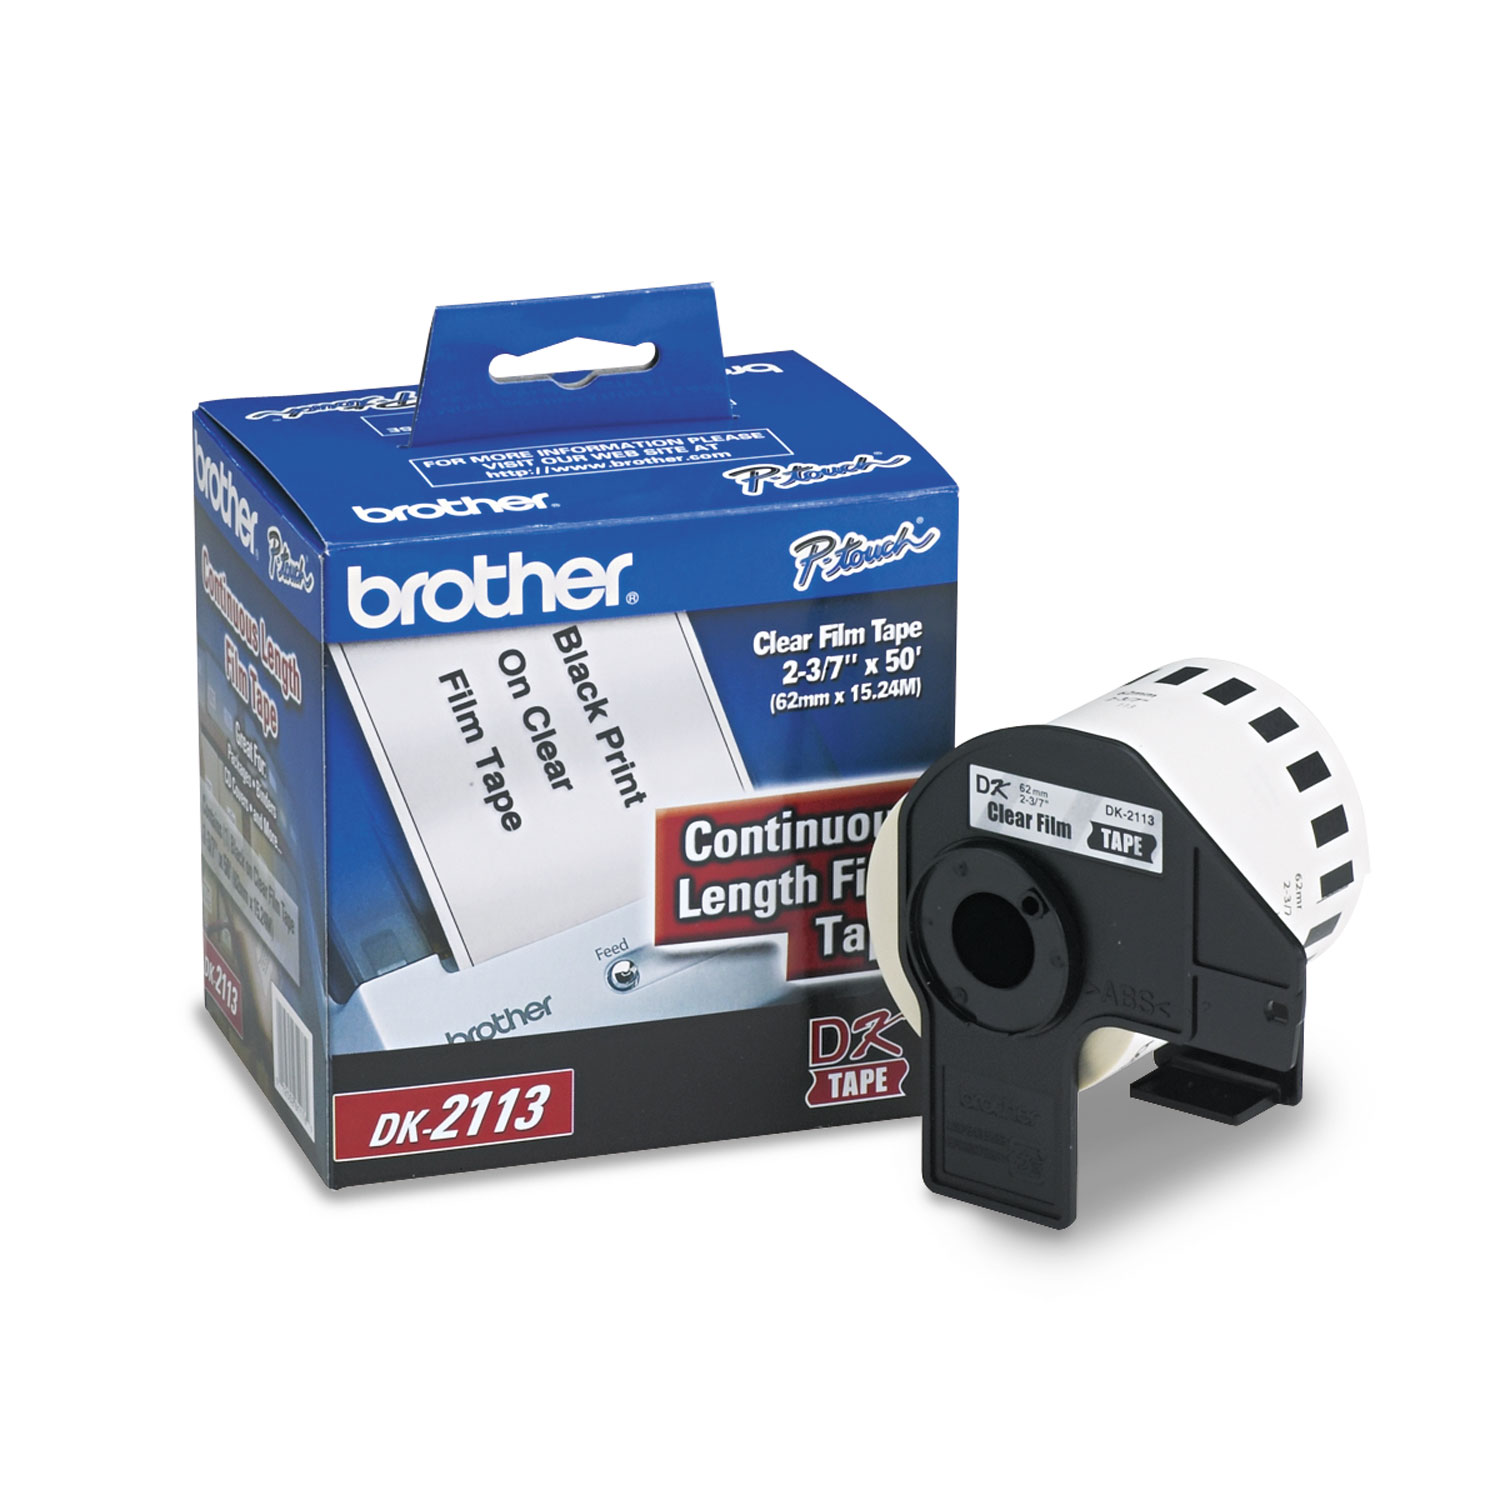  Brother DK2113 Continuous Film Label Tape, 2.4 x 50 ft Roll, Clear (BRTDK2113) 